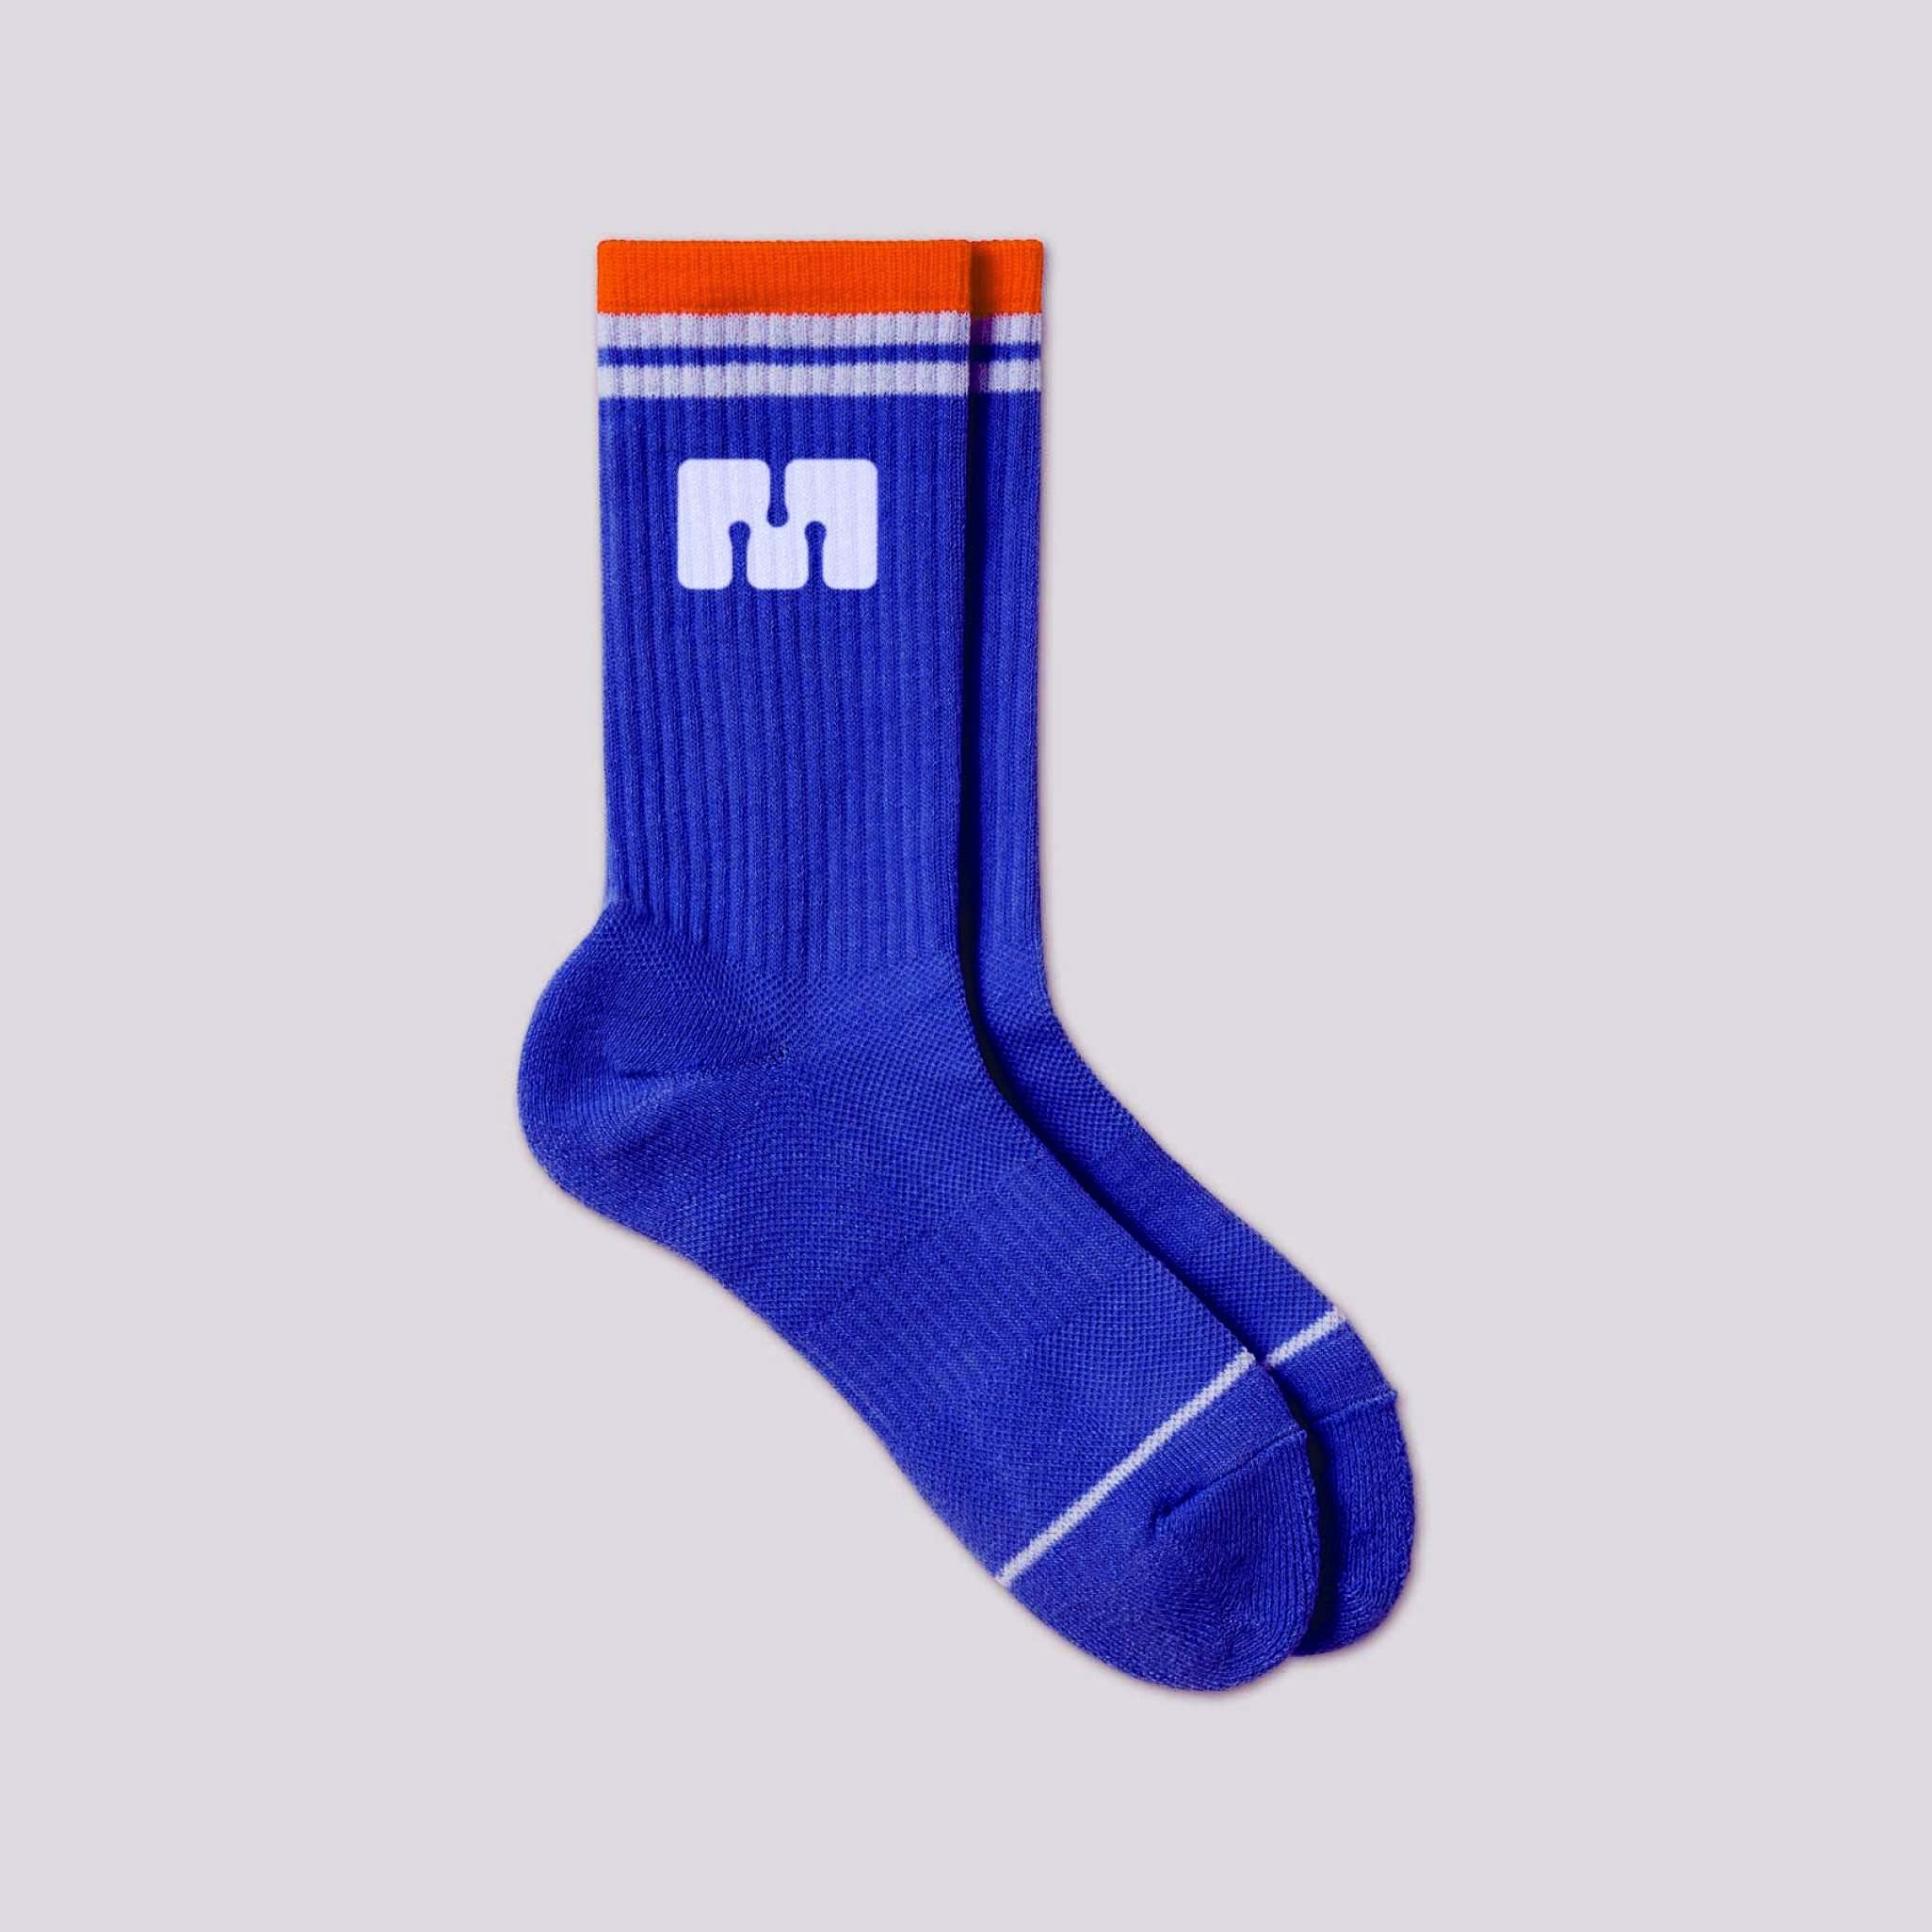 Mulu sock design with letter M